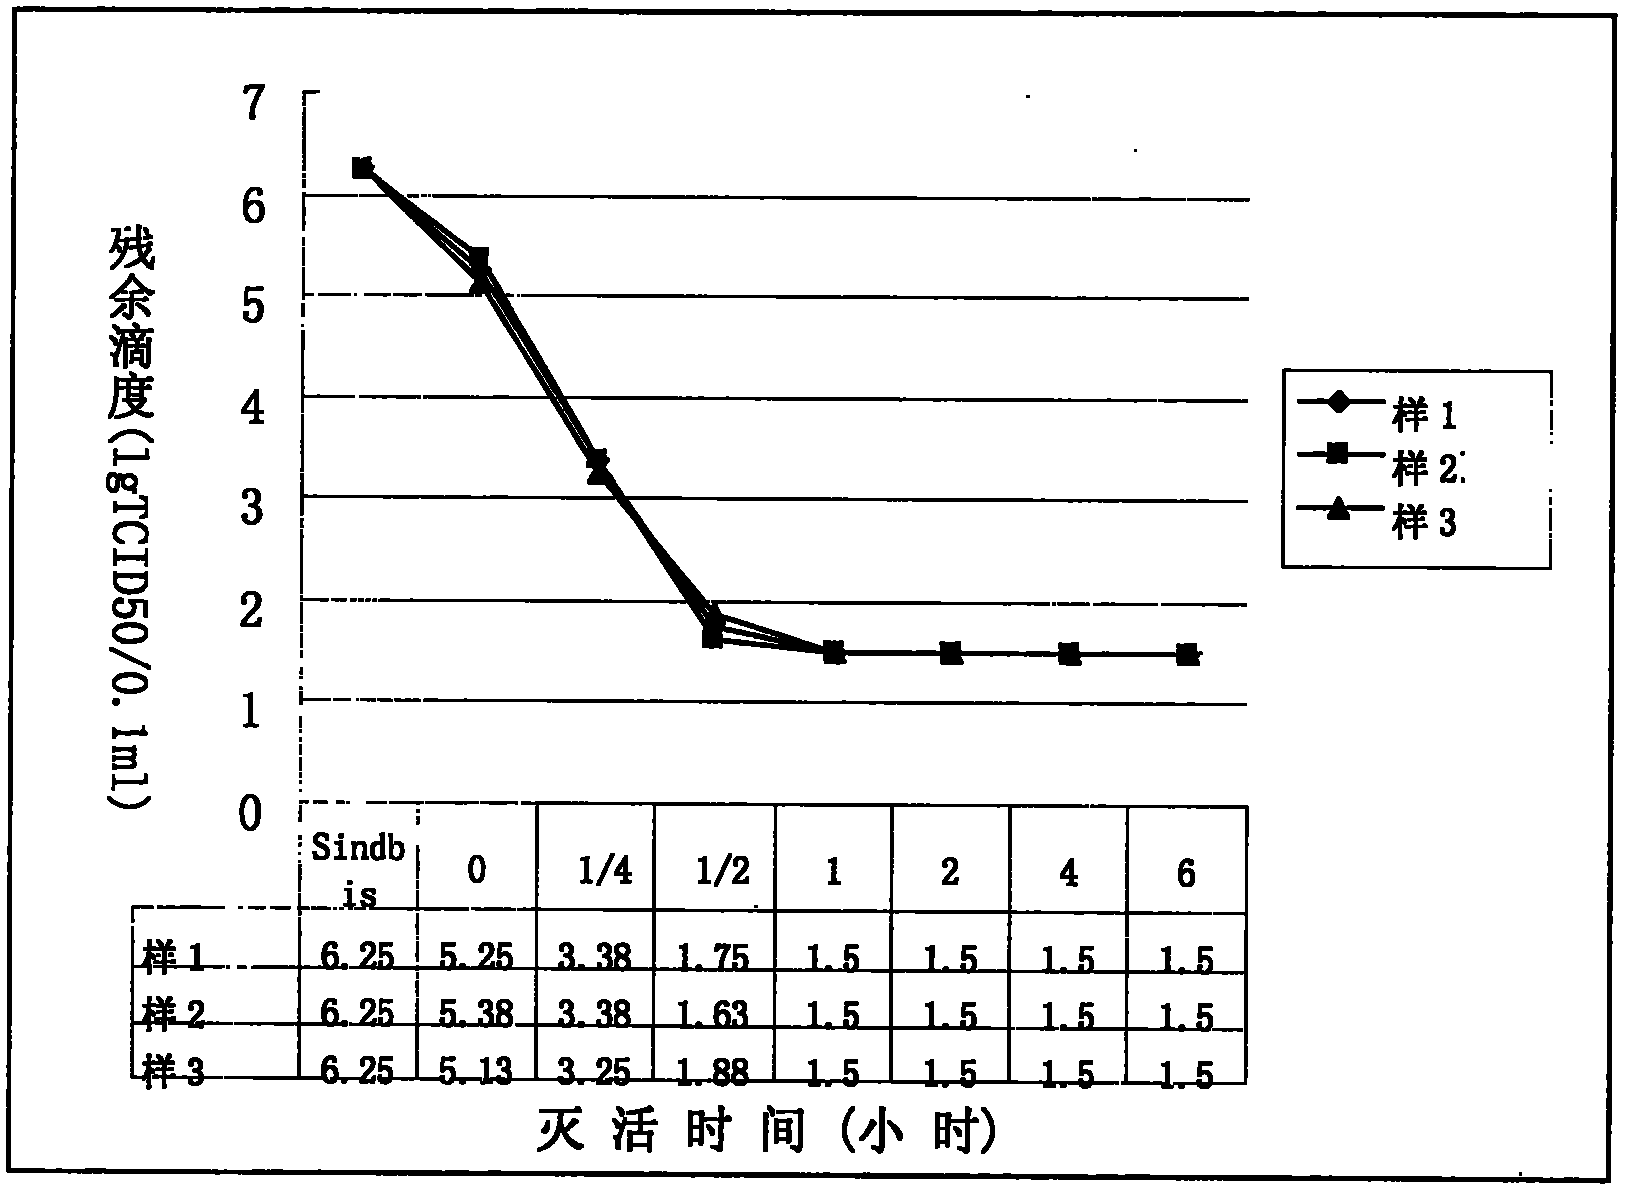 Method for extracting human fibrinogen from component I through column chromatography